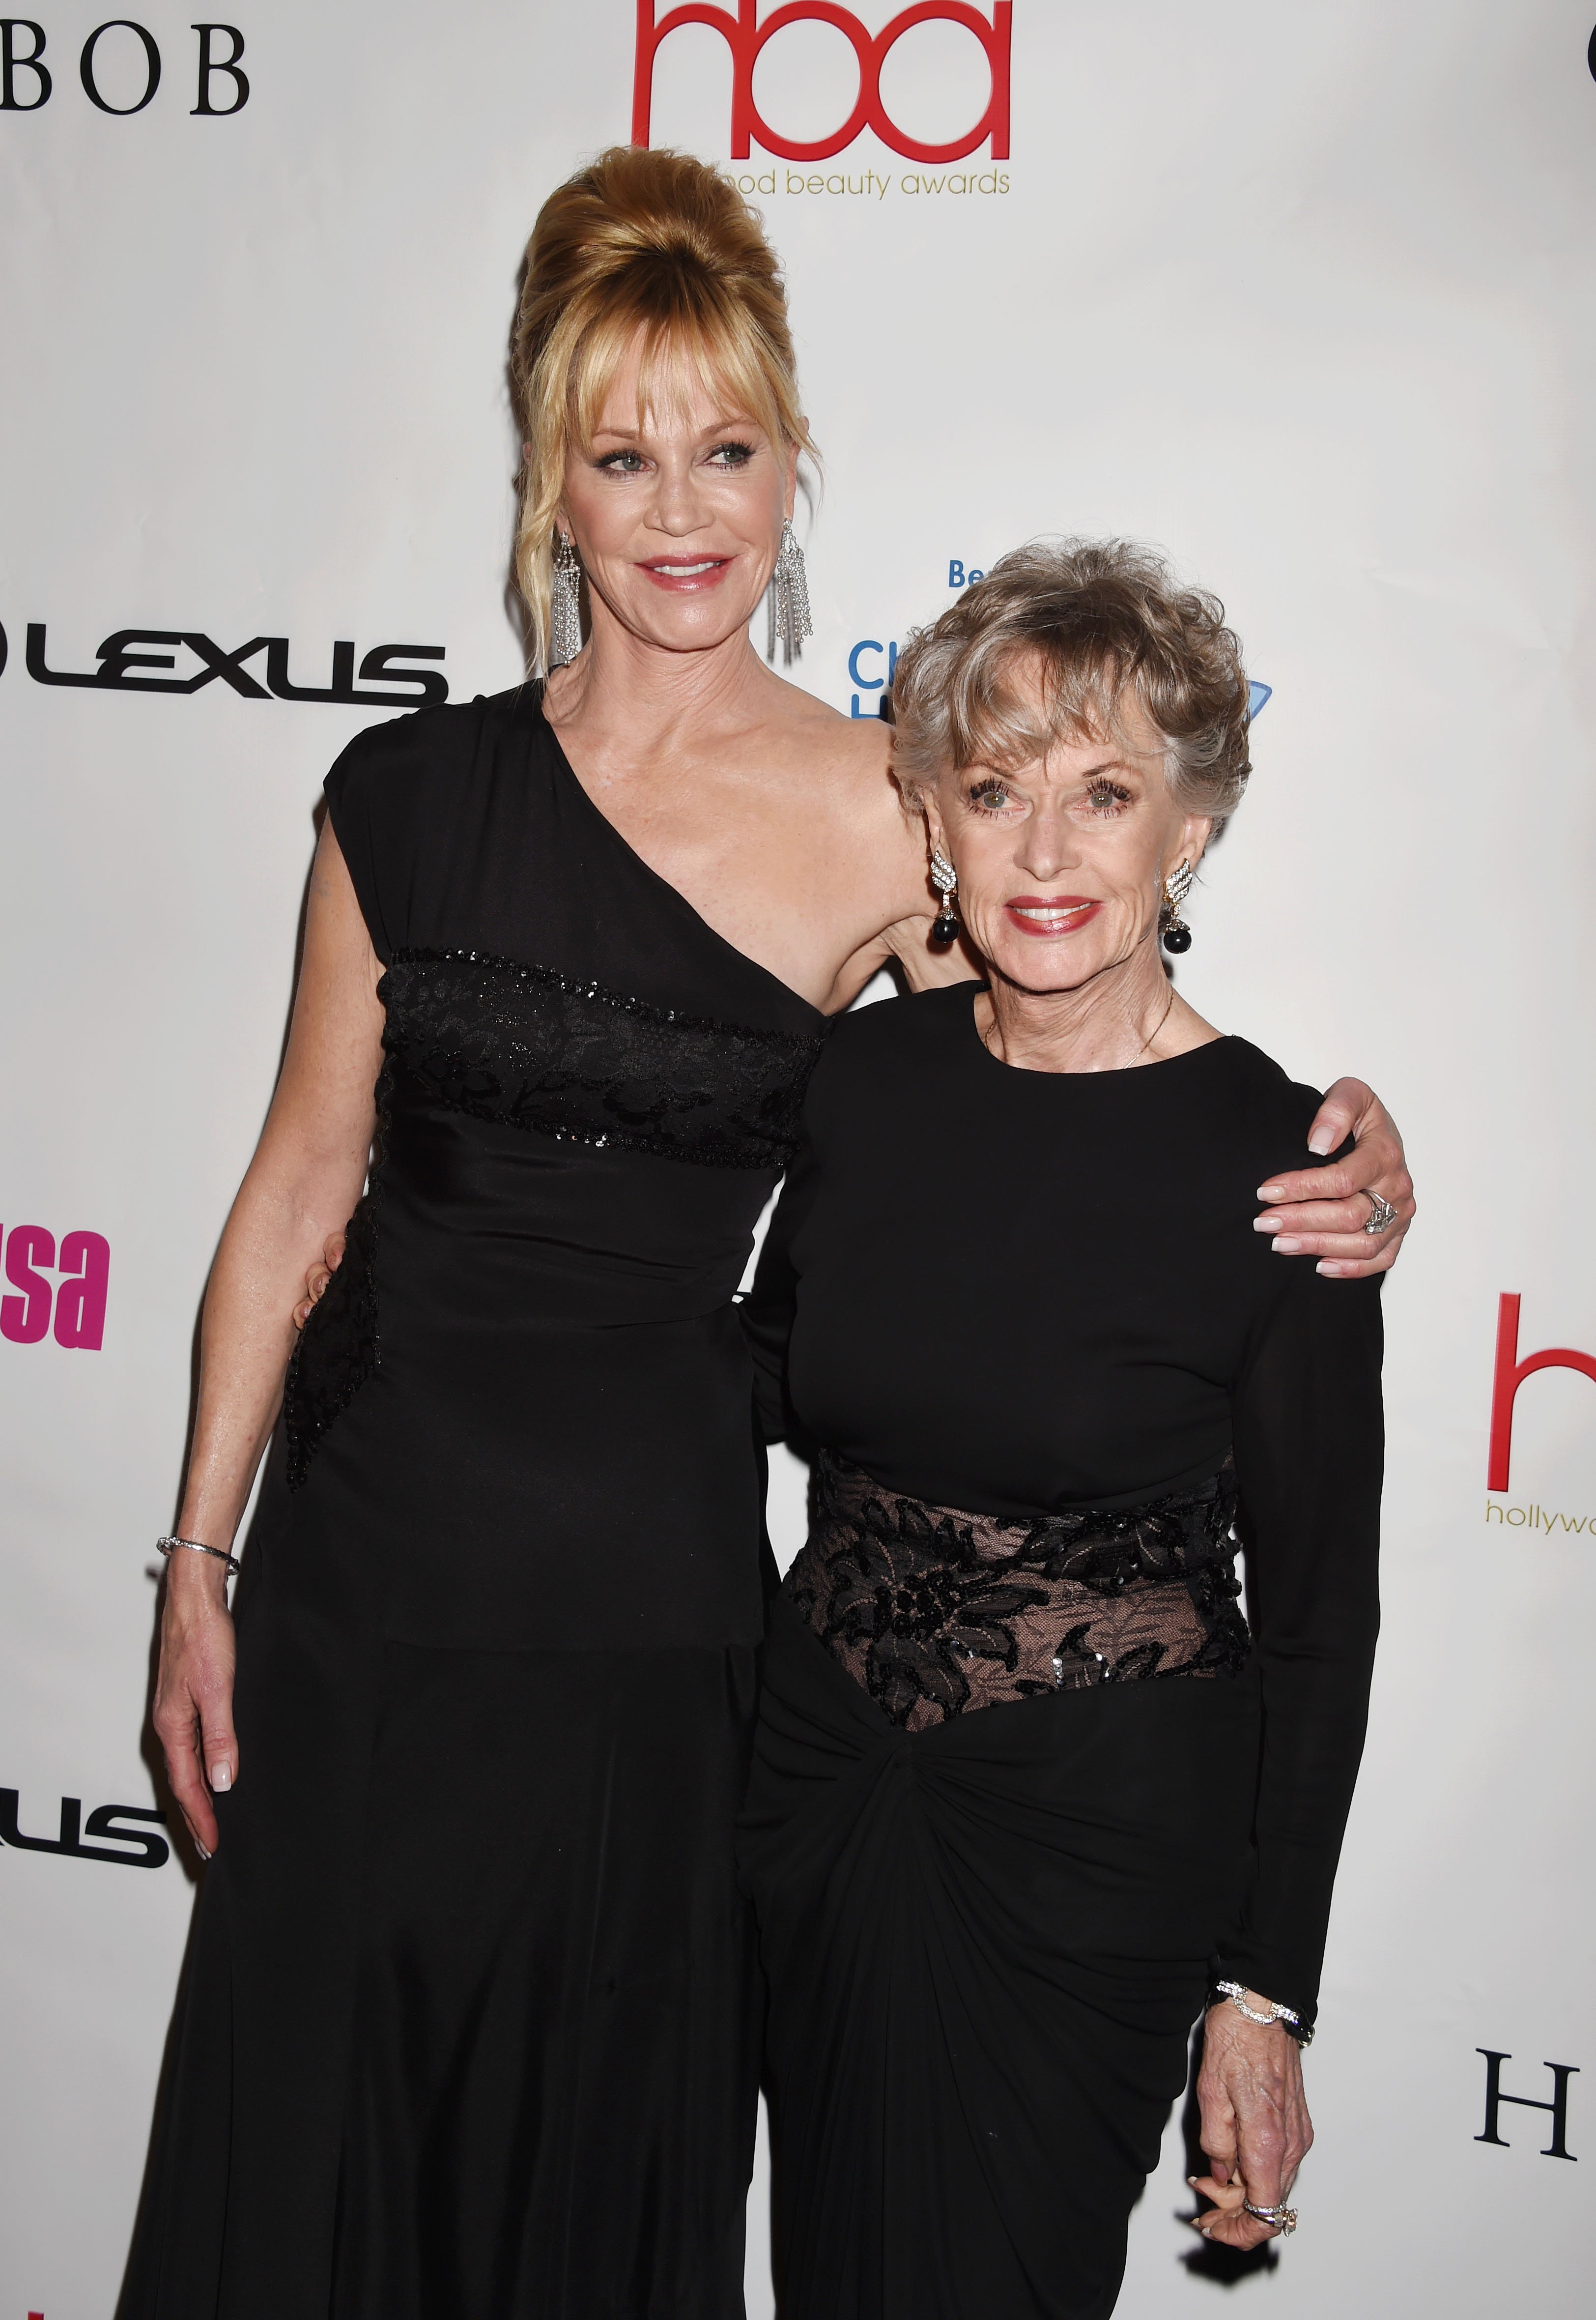 Actress Melanie Griffith and mother actress Tippi Hedren attend the 2nd Annual Hollywood Beauty Awards benefiting Children's Hospital Los Angeles at Avalon Hollywood on February 21, 2016 |Photo: Getty Images